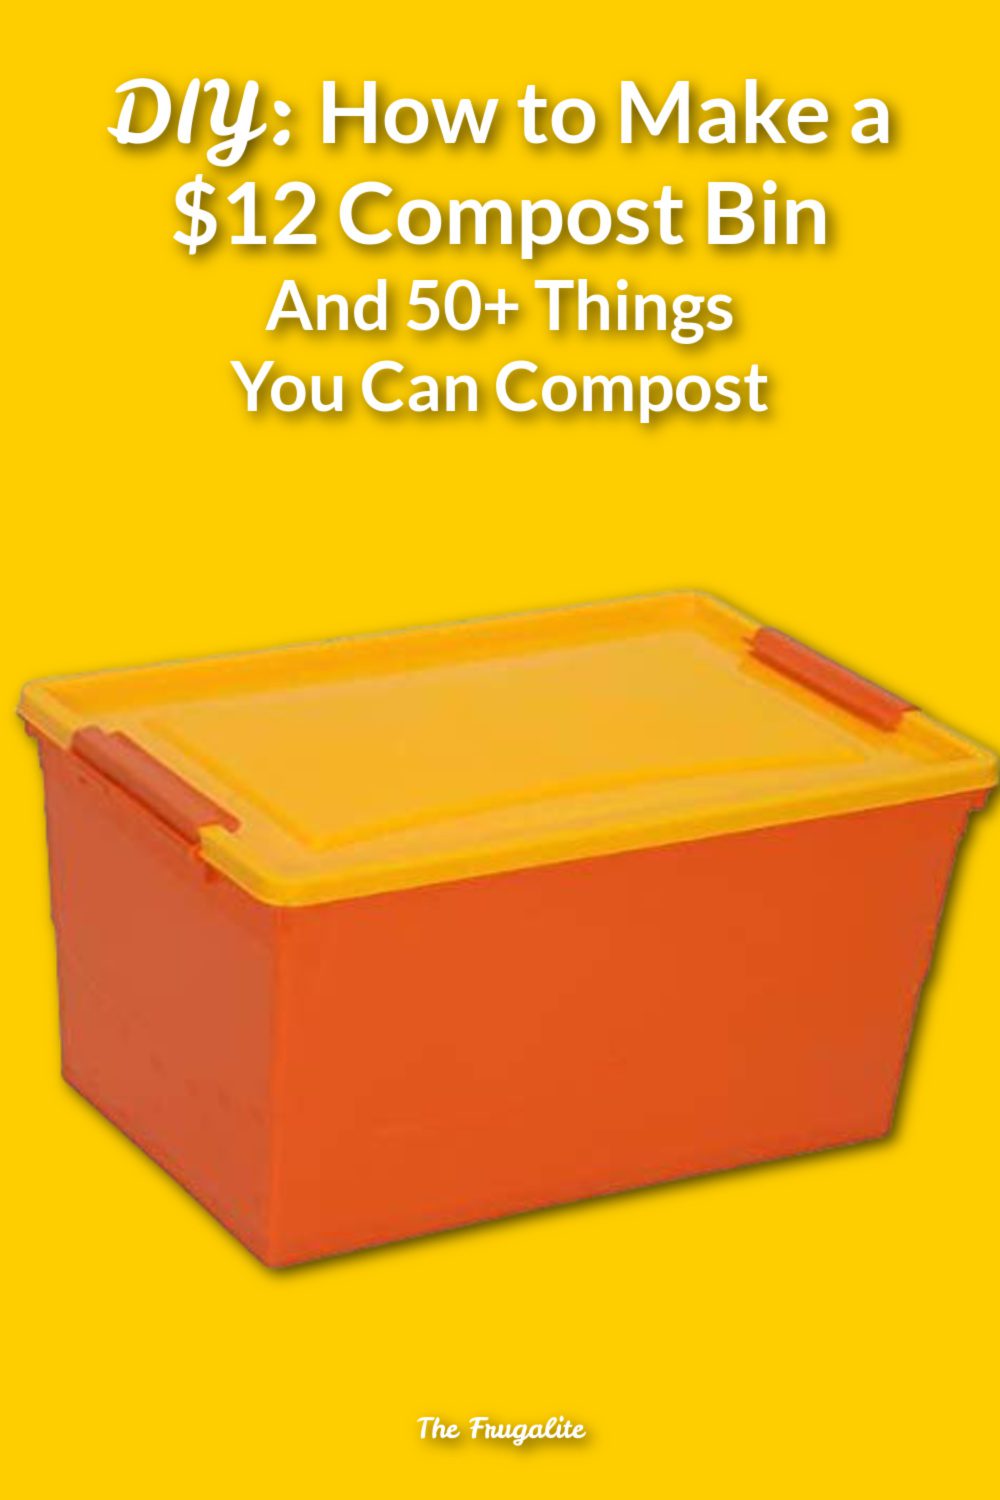 Composting for Beginners: $12 DIY Compost Bin (and 50+ Things You Can Compost)